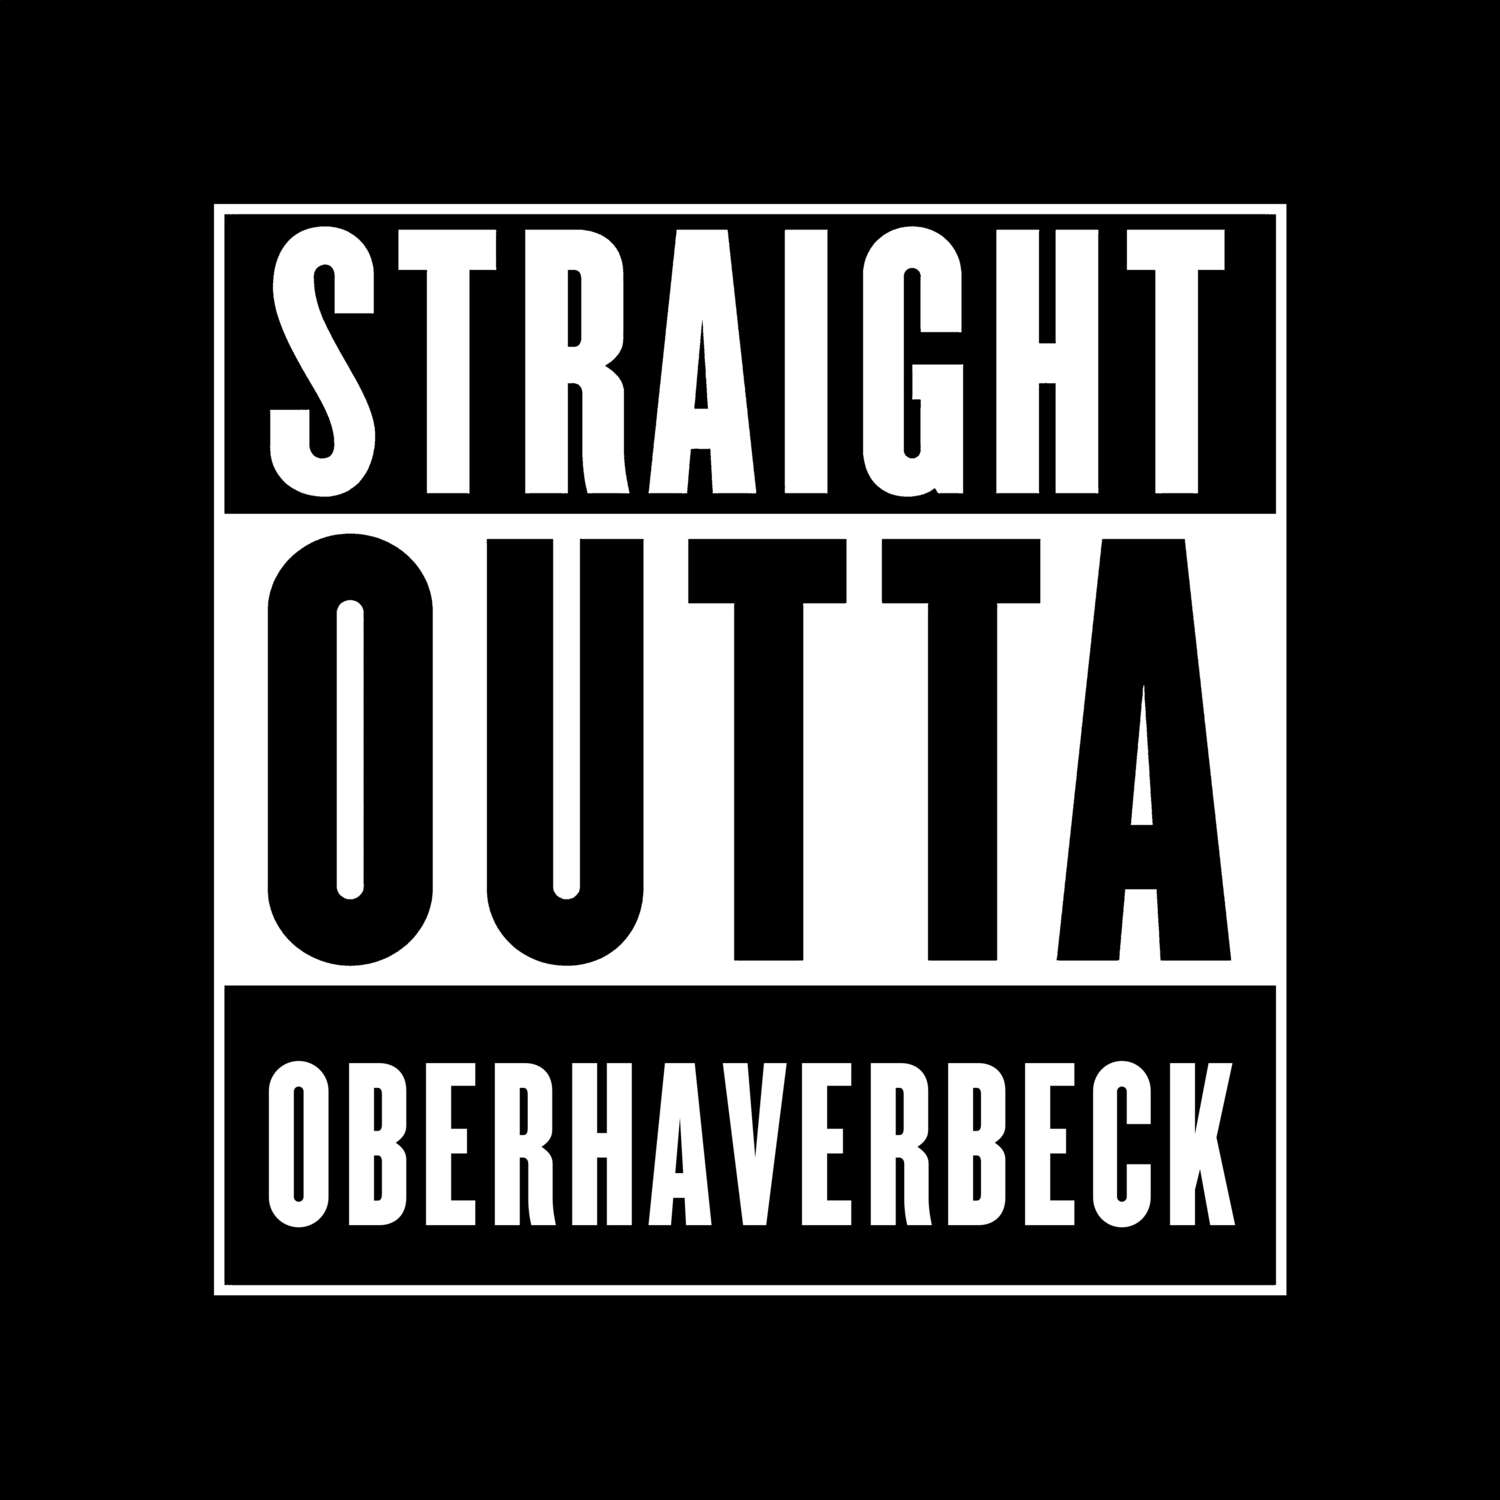 Oberhaverbeck T-Shirt »Straight Outta«